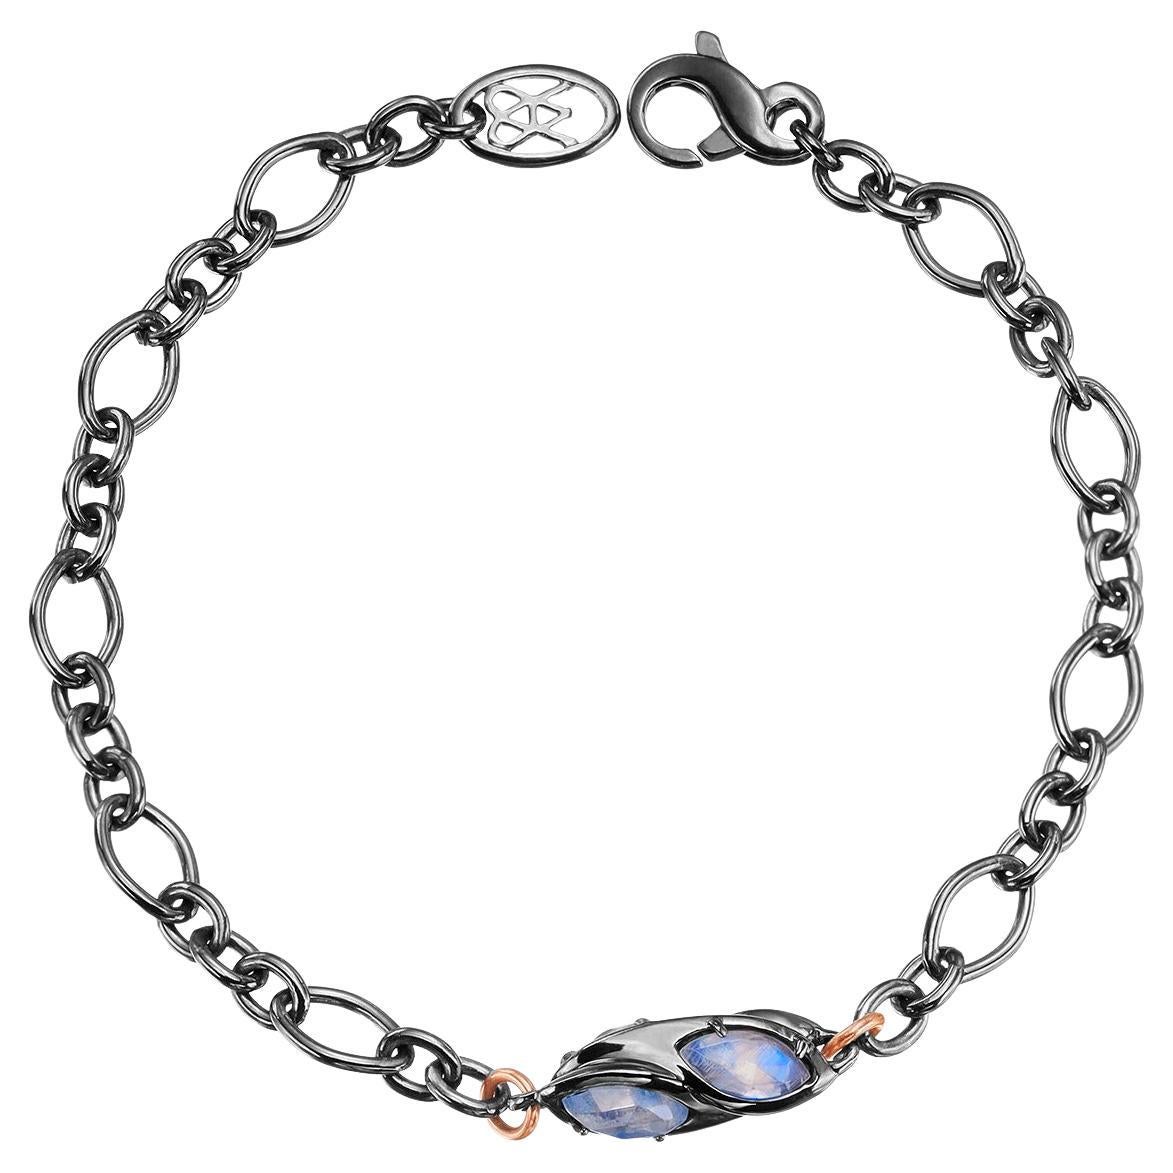 Sterling Silver Chain Bracelet W/ Rose Cut Moonstone Marquise Set in Sculpture